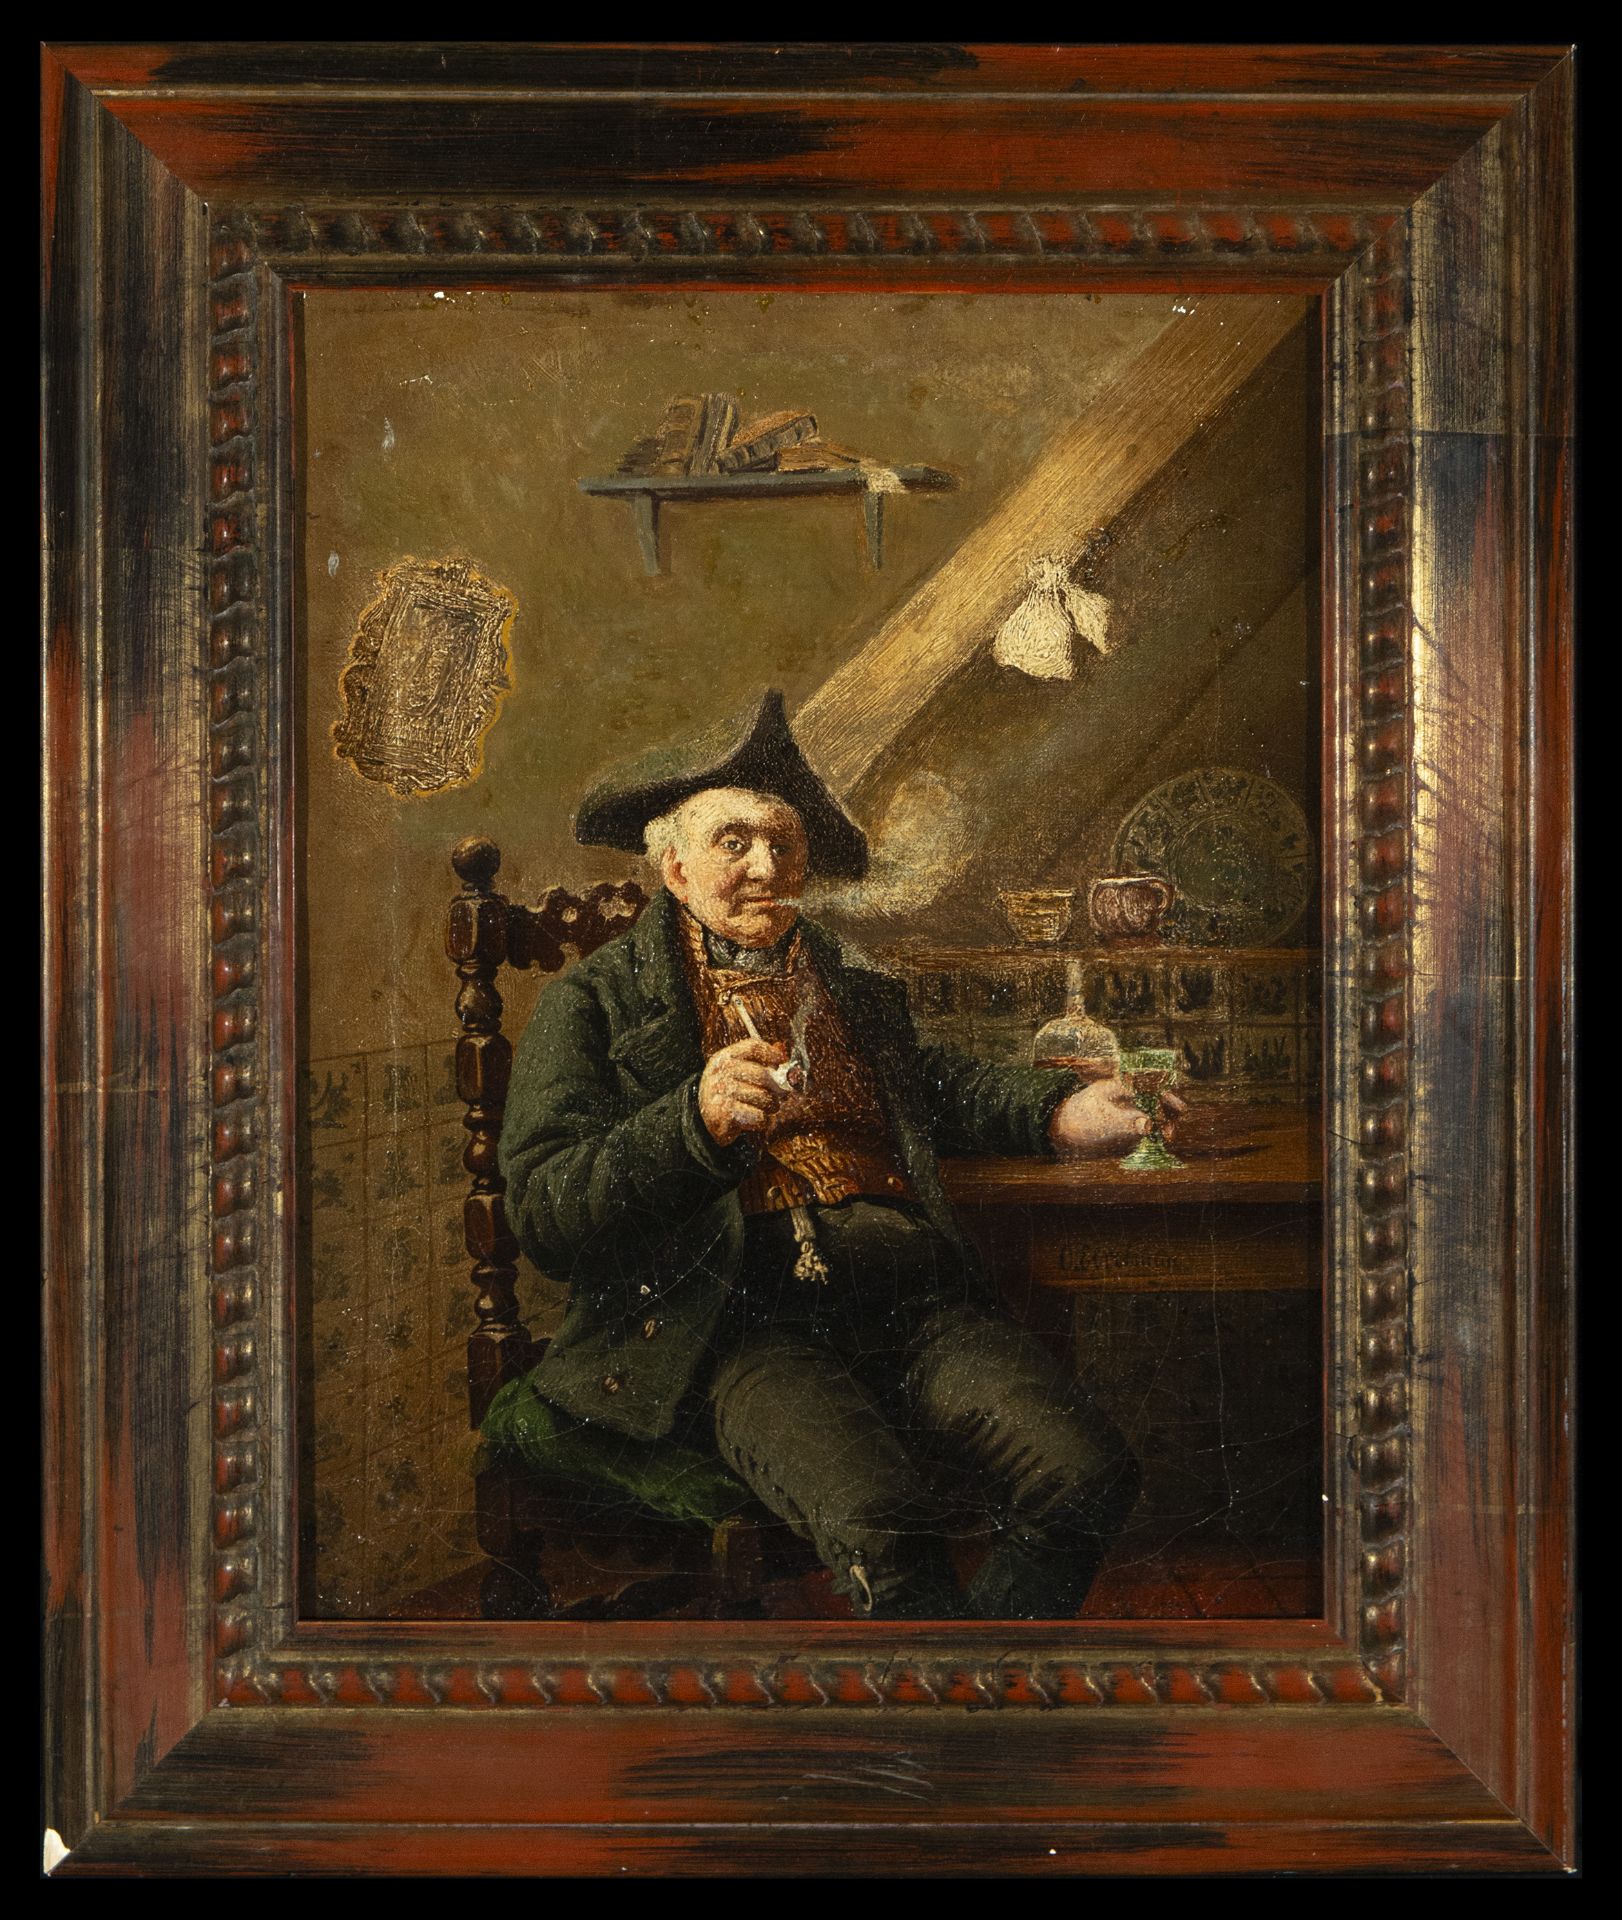 The Smoker, 19th century Central European school, signed, Austria or Germany